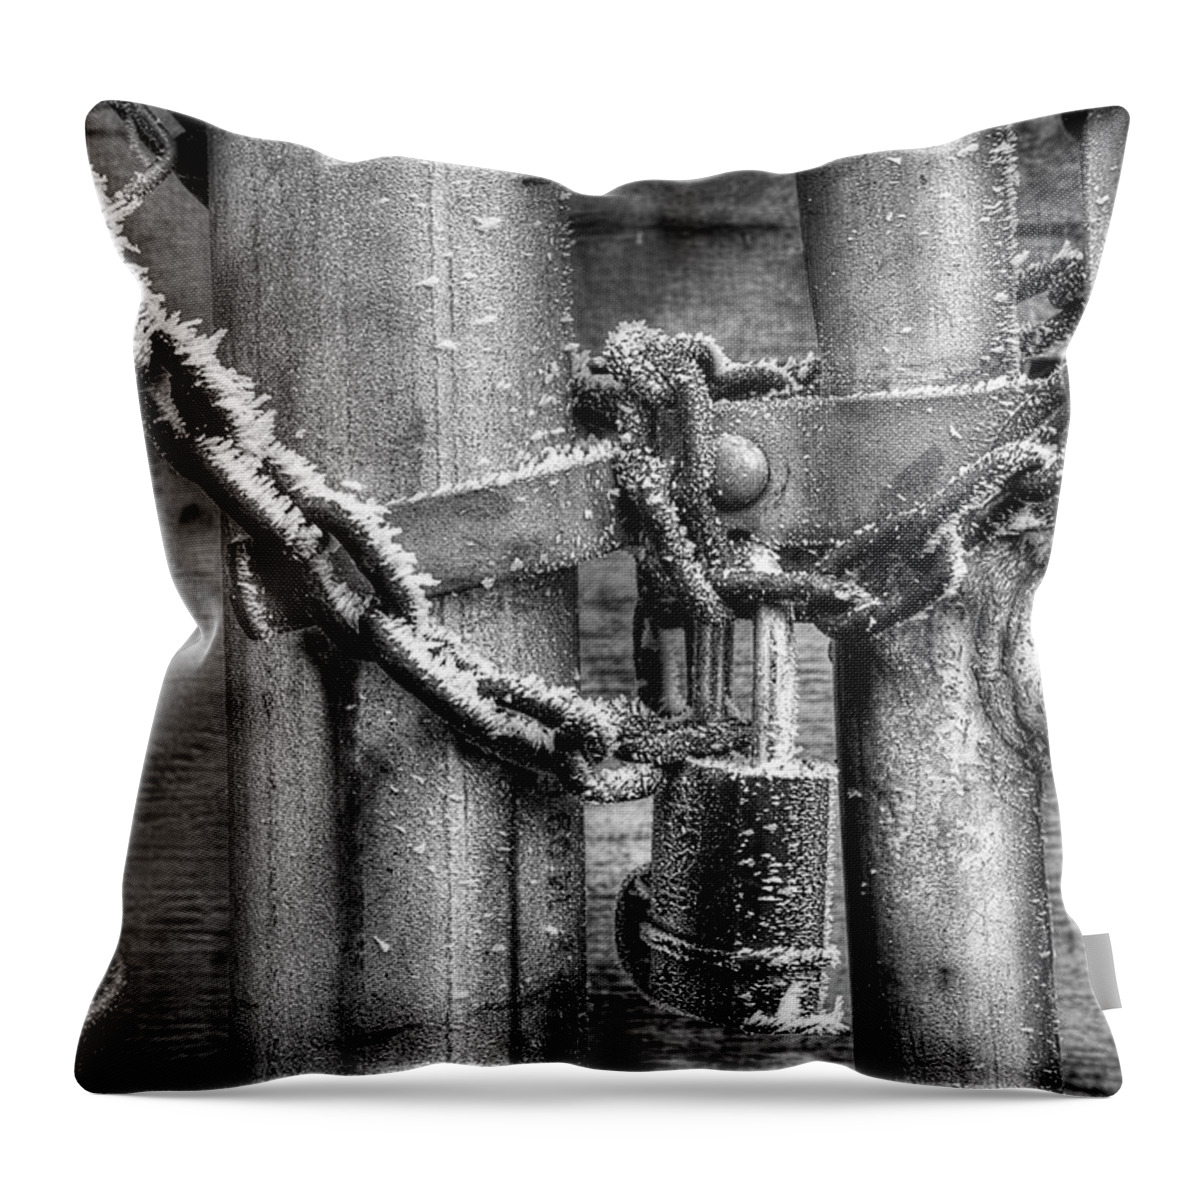 Fence Throw Pillow featuring the photograph Don't Fence Me Out by Mike Eingle